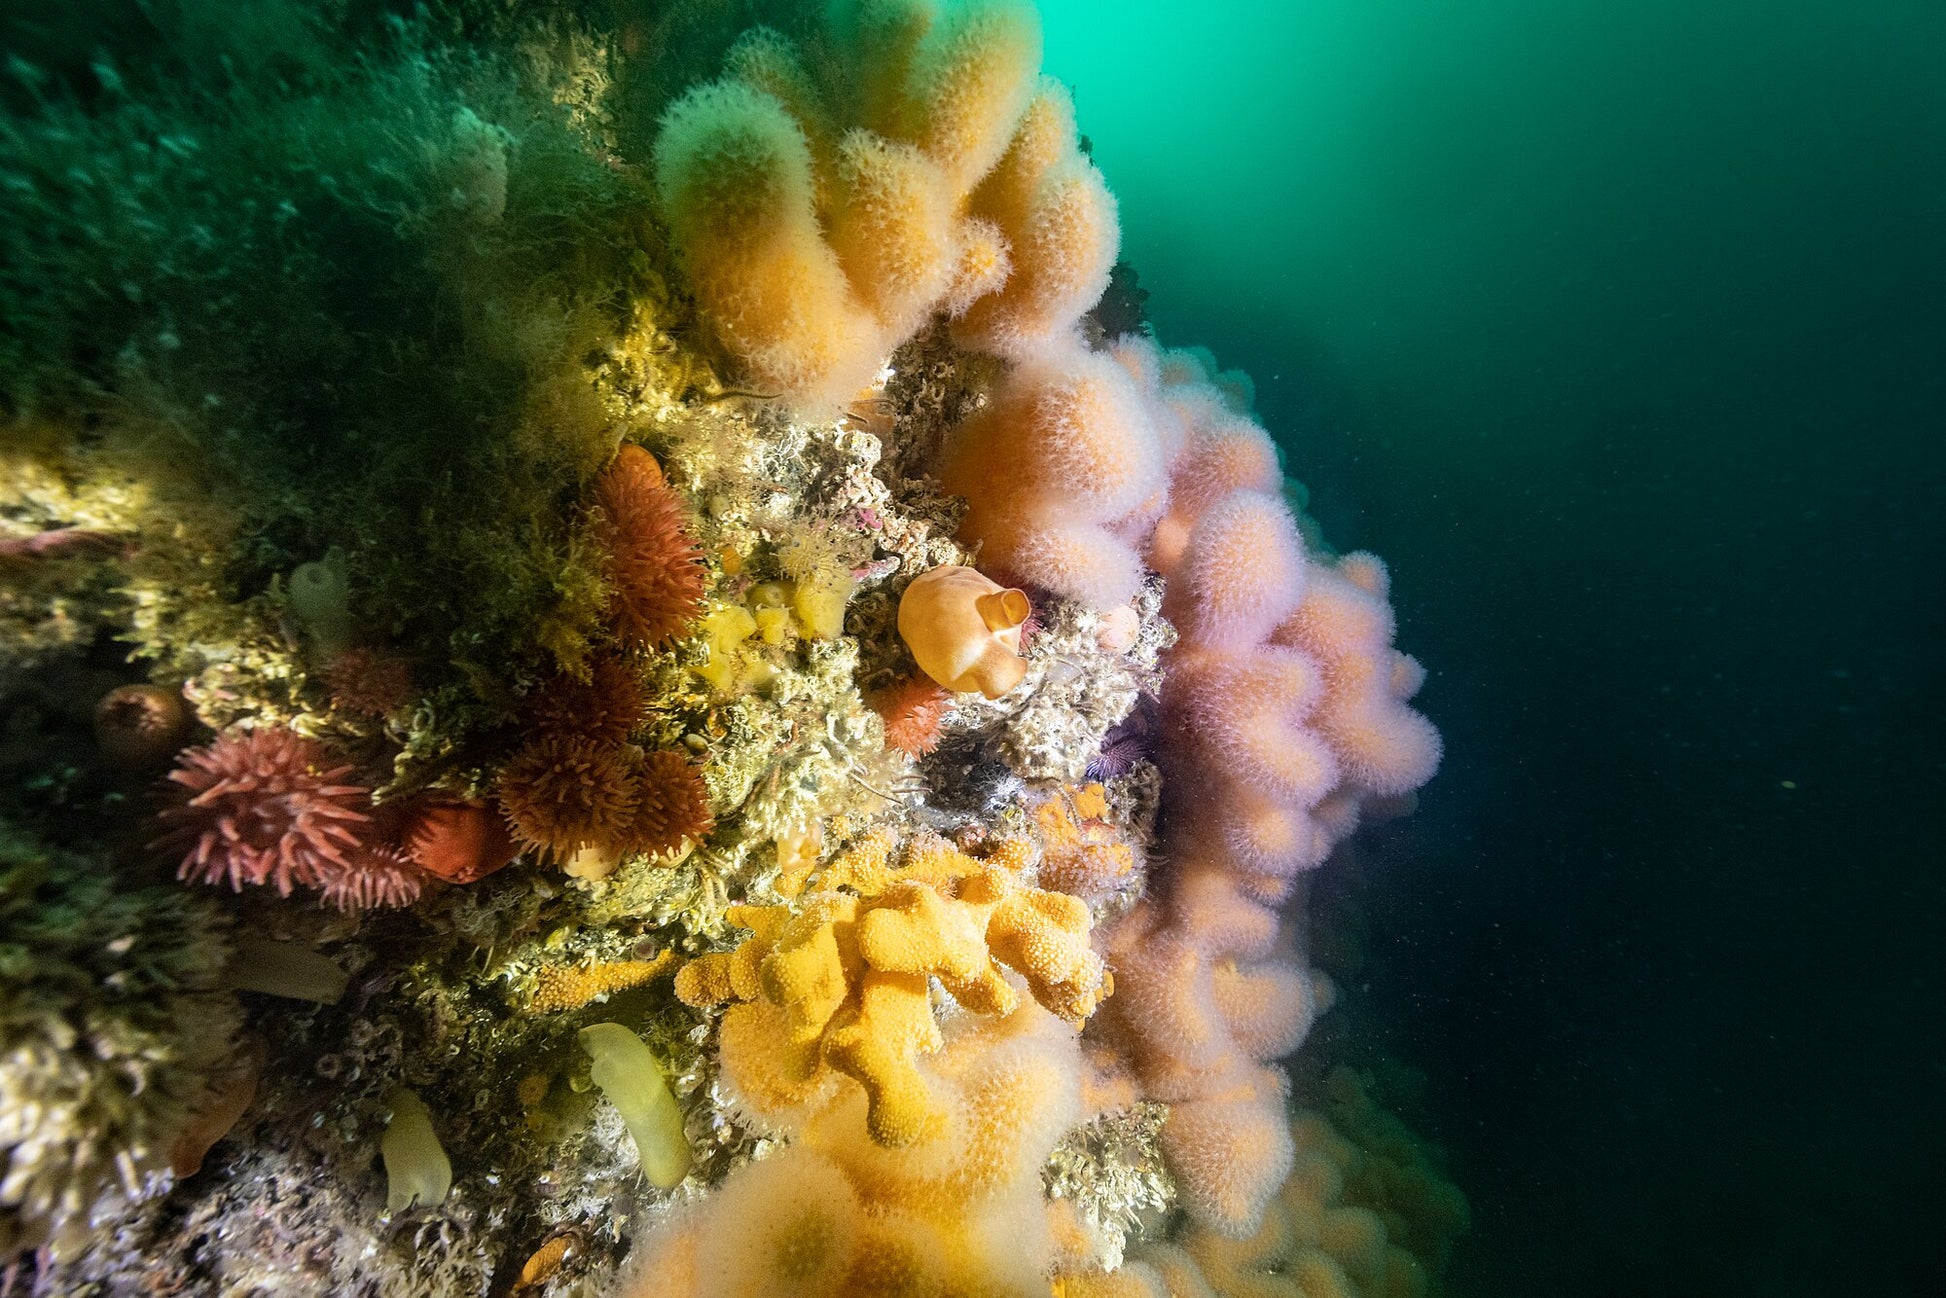 Colorful soft corals photographed in the Salstraumen strait.